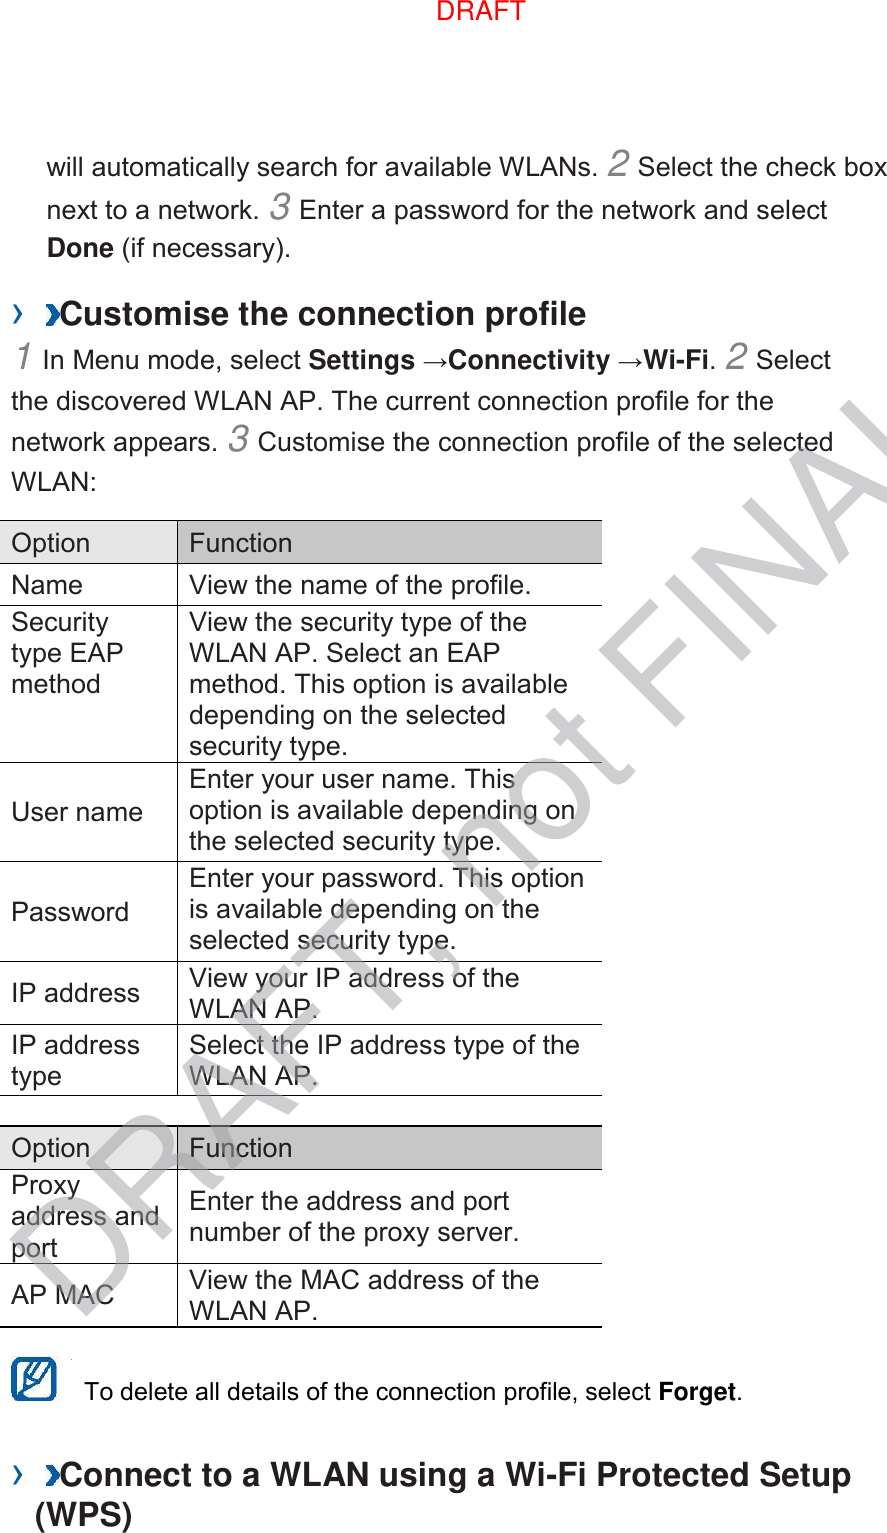 will automatically search for available WLANs. 2 Select the check box next to a network. 3 Enter a password for the network and select Done (if necessary).   ›  Customise the connection profile   1 In Menu mode, select Settings →Connectivity →Wi-Fi. 2 Select the discovered WLAN AP. The current connection profile for the network appears. 3 Customise the connection profile of the selected WLAN:   Option   Function   Name   View the name of the profile.   Security type EAP method   View the security type of the WLAN AP. Select an EAP method. This option is available depending on the selected security type.   User name   Enter your user name. This option is available depending on the selected security type.   Password   Enter your password. This option is available depending on the selected security type.   IP address   View your IP address of the WLAN AP.   IP address type   Select the IP address type of the WLAN AP.    Option   Function   Proxy address and port   Enter the address and port number of the proxy server.   AP MAC   View the MAC address of the WLAN AP.      To delete all details of the connection profile, select Forget.   ›  Connect to a WLAN using a Wi-Fi Protected Setup (WPS)   DRAFTDRAFT, not FINAL